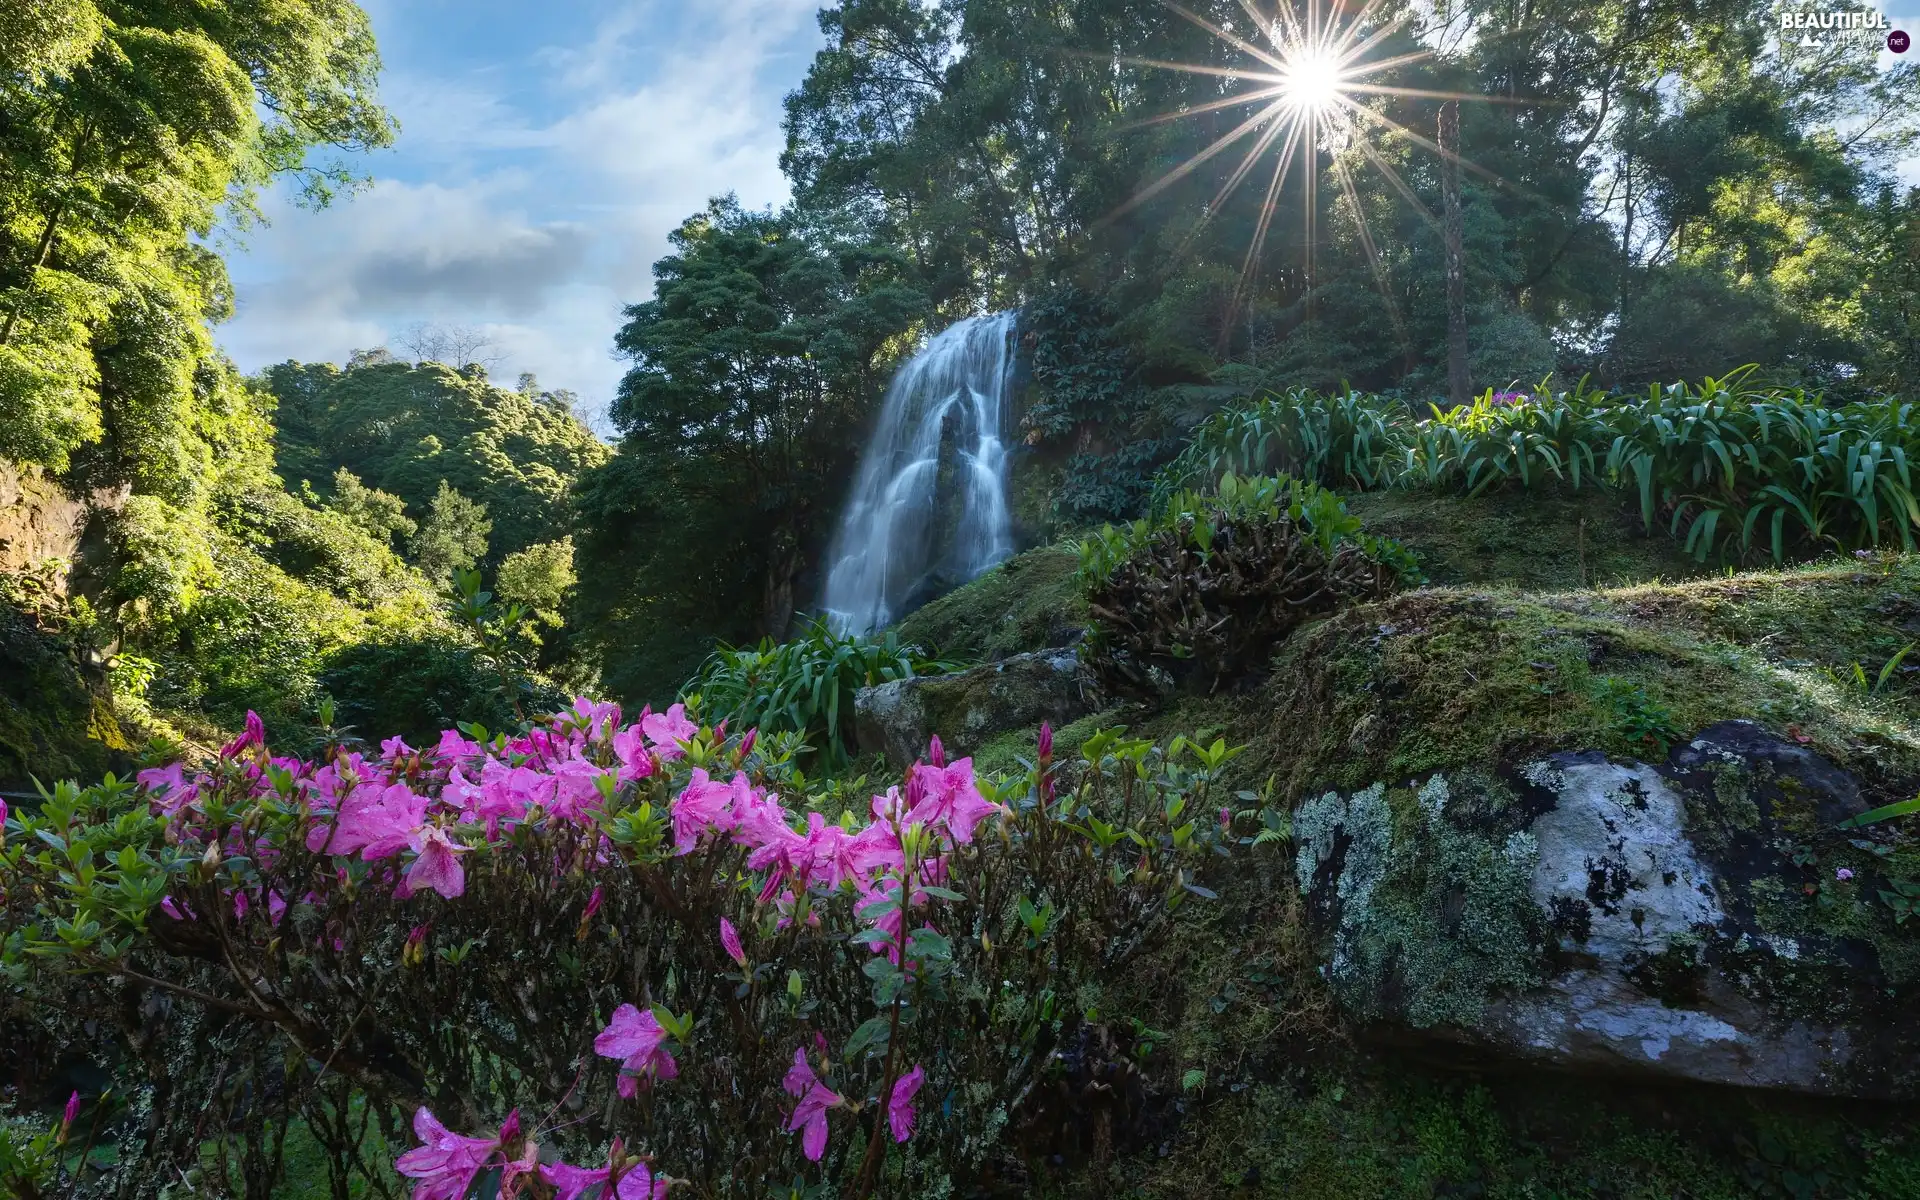 rays of the Sun, Rhododendron, rocks, VEGETATION, waterfall